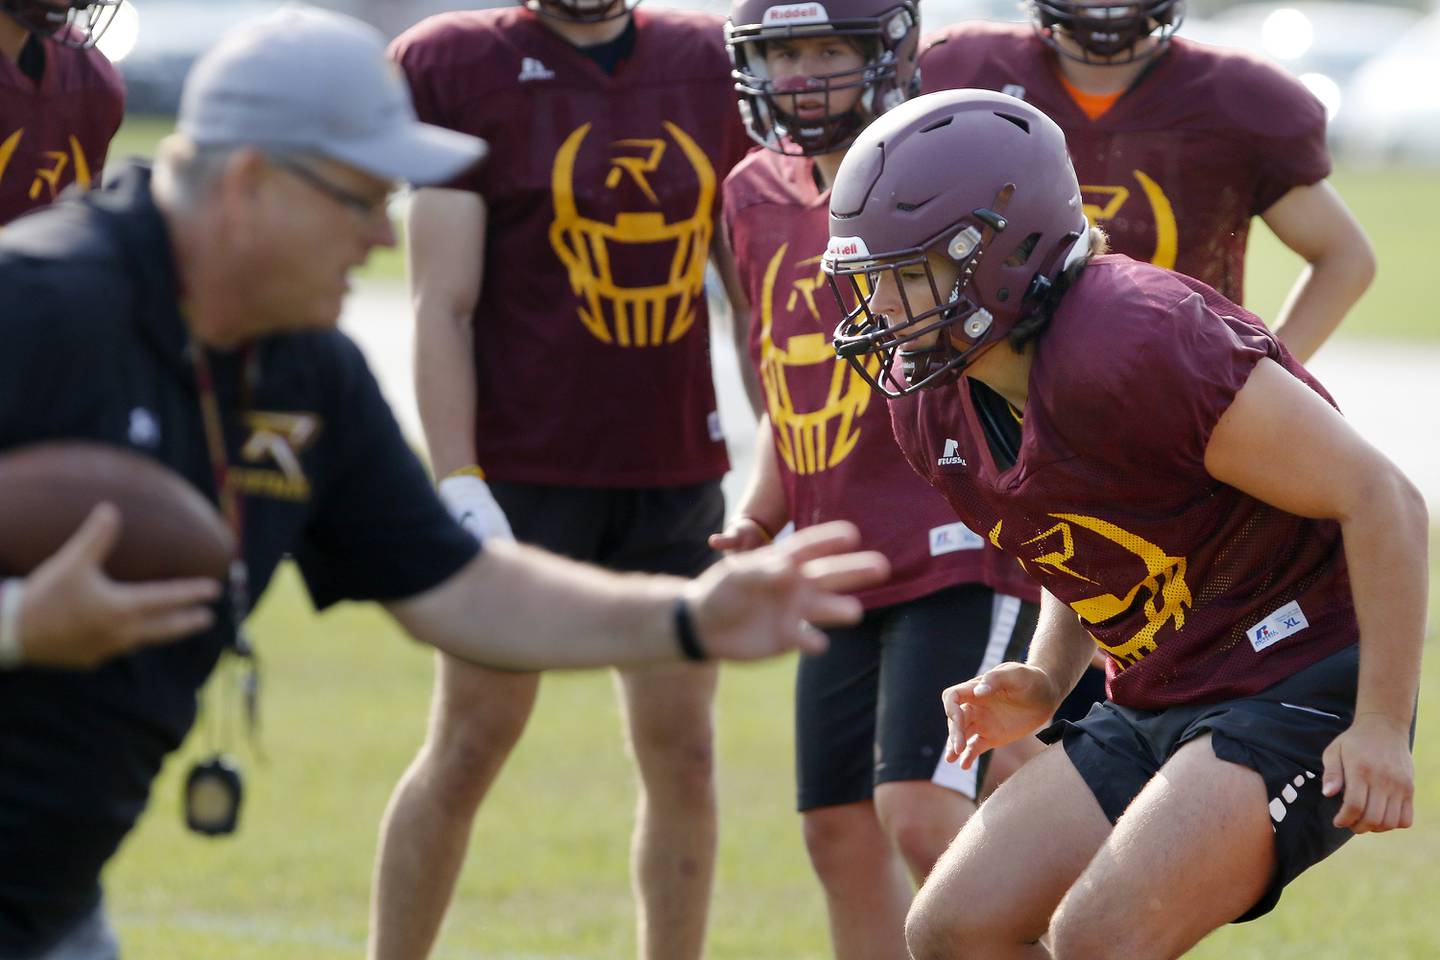 Brock Wood, right, works the drills during practice with the varsity football team at Richmond-Burton High School on Wednesday, July 14, 2021 in Richmond.